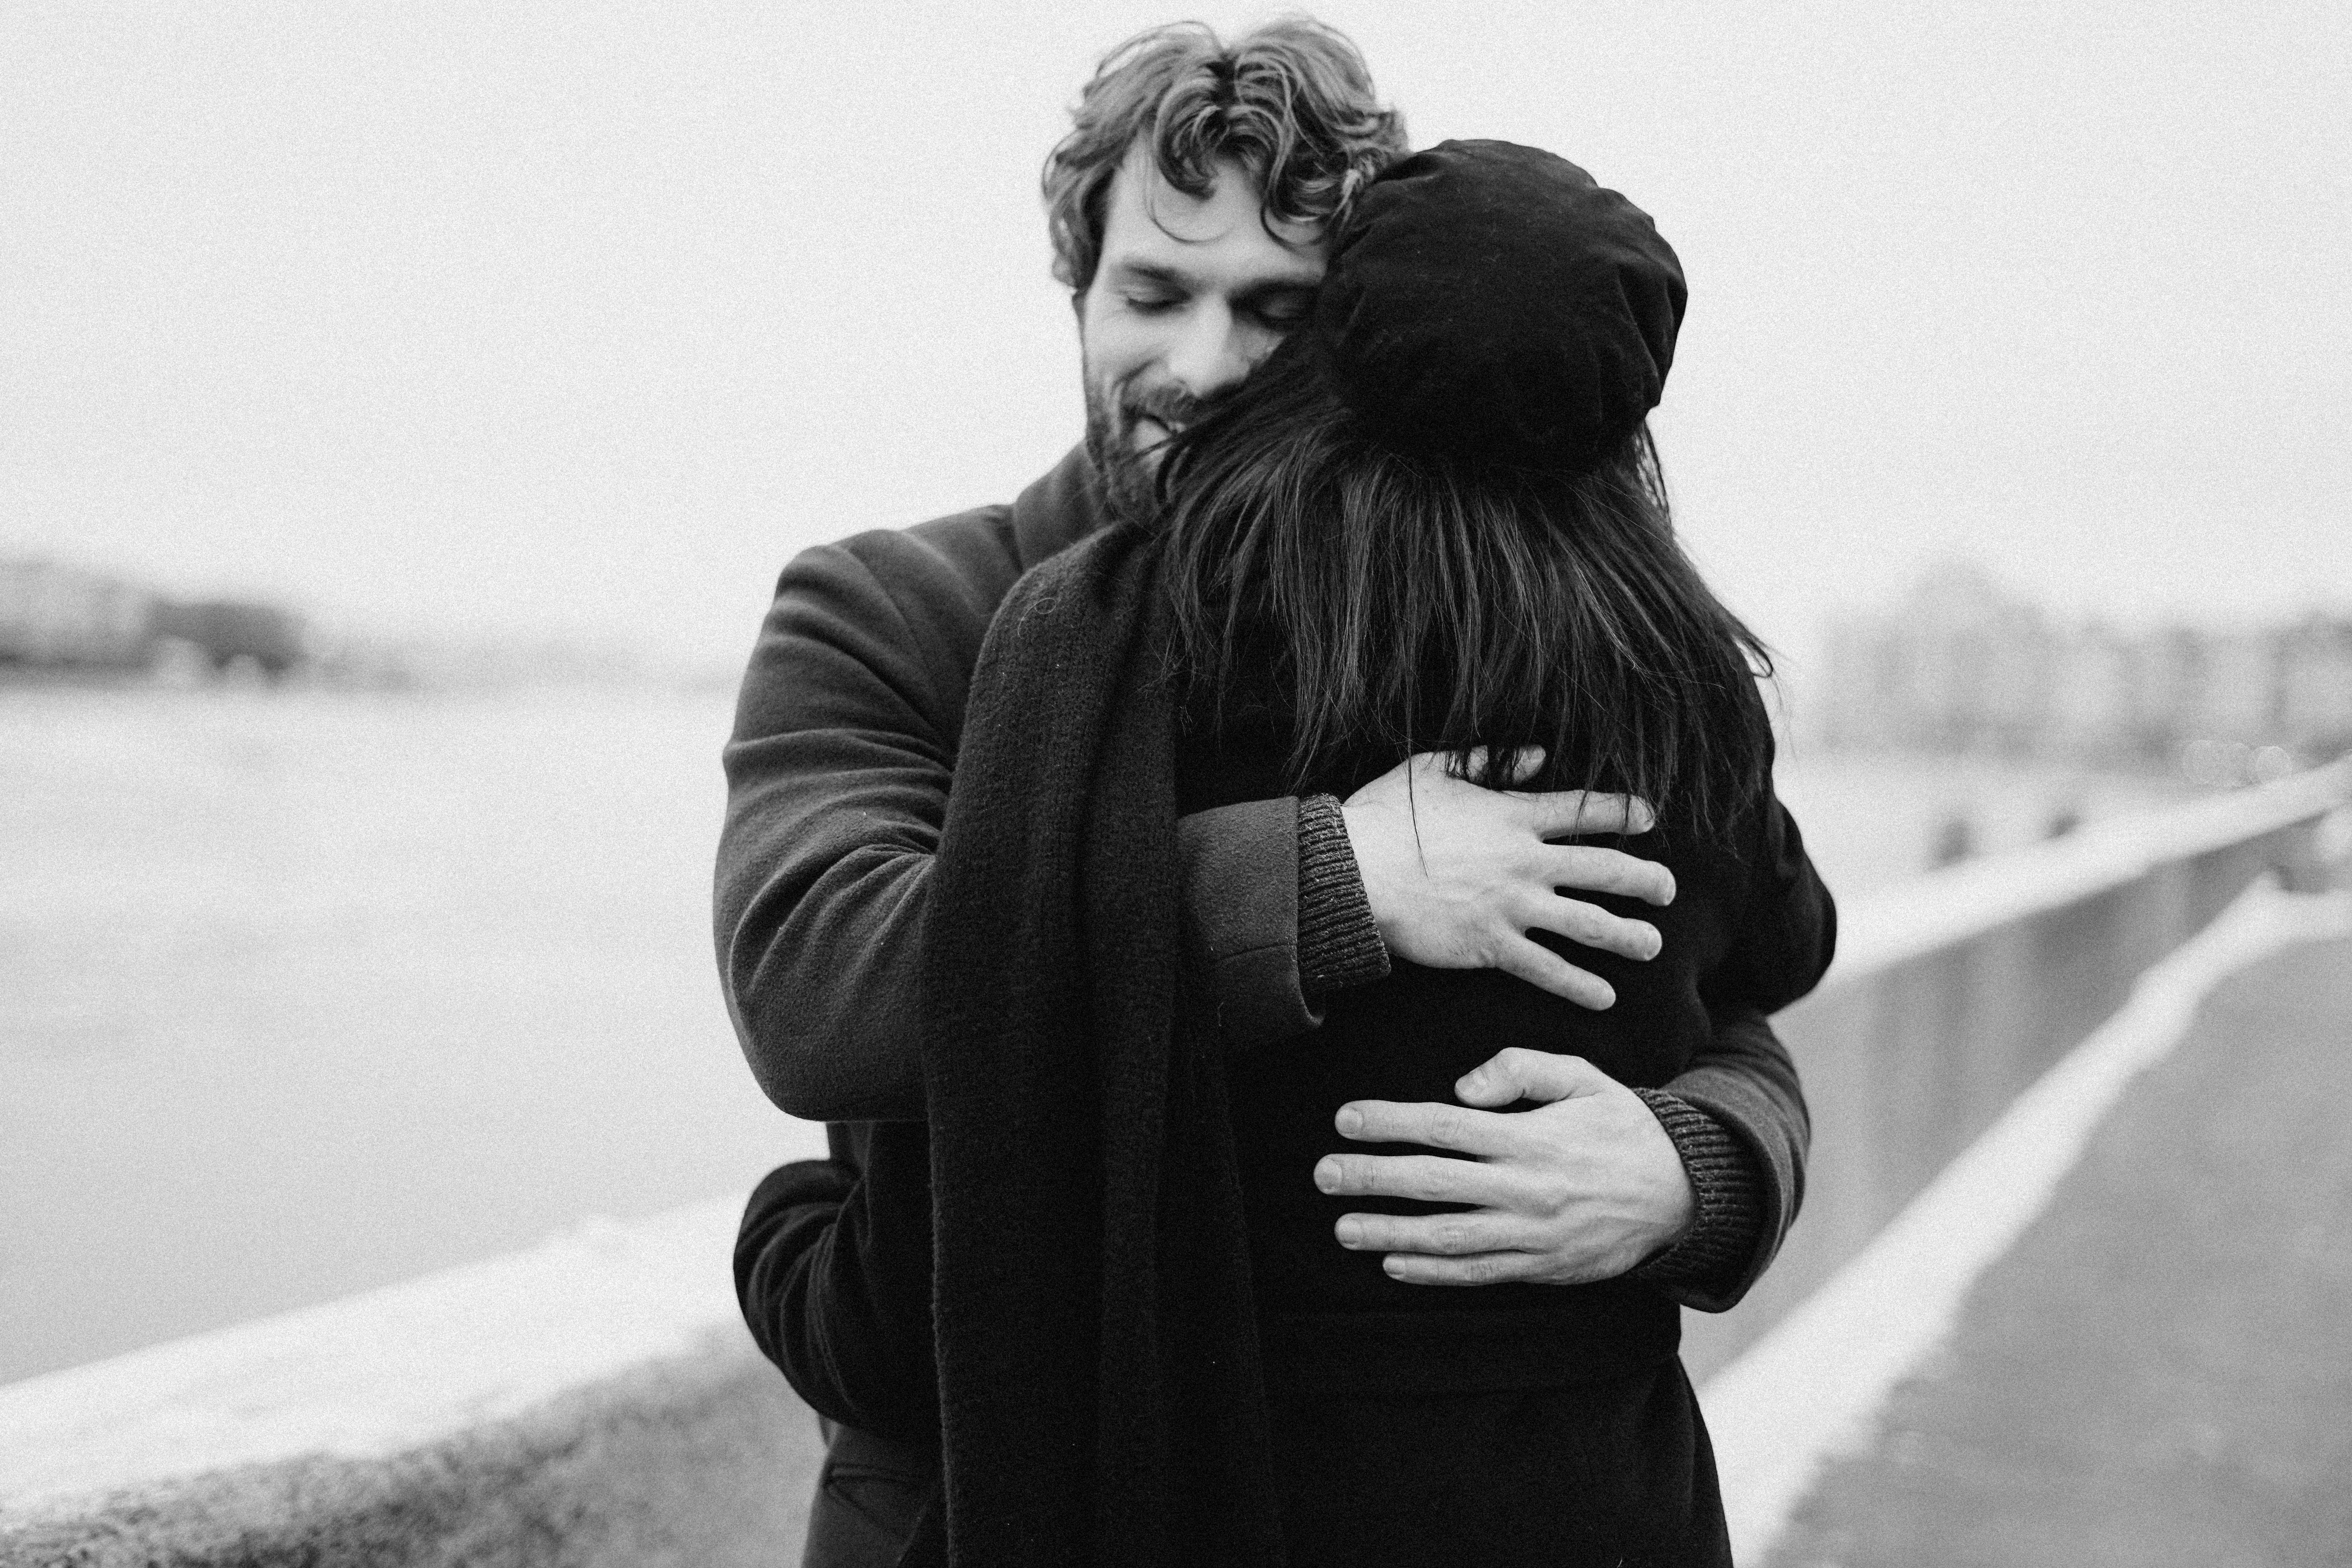 A man and a woman embracing | Source: Pexels